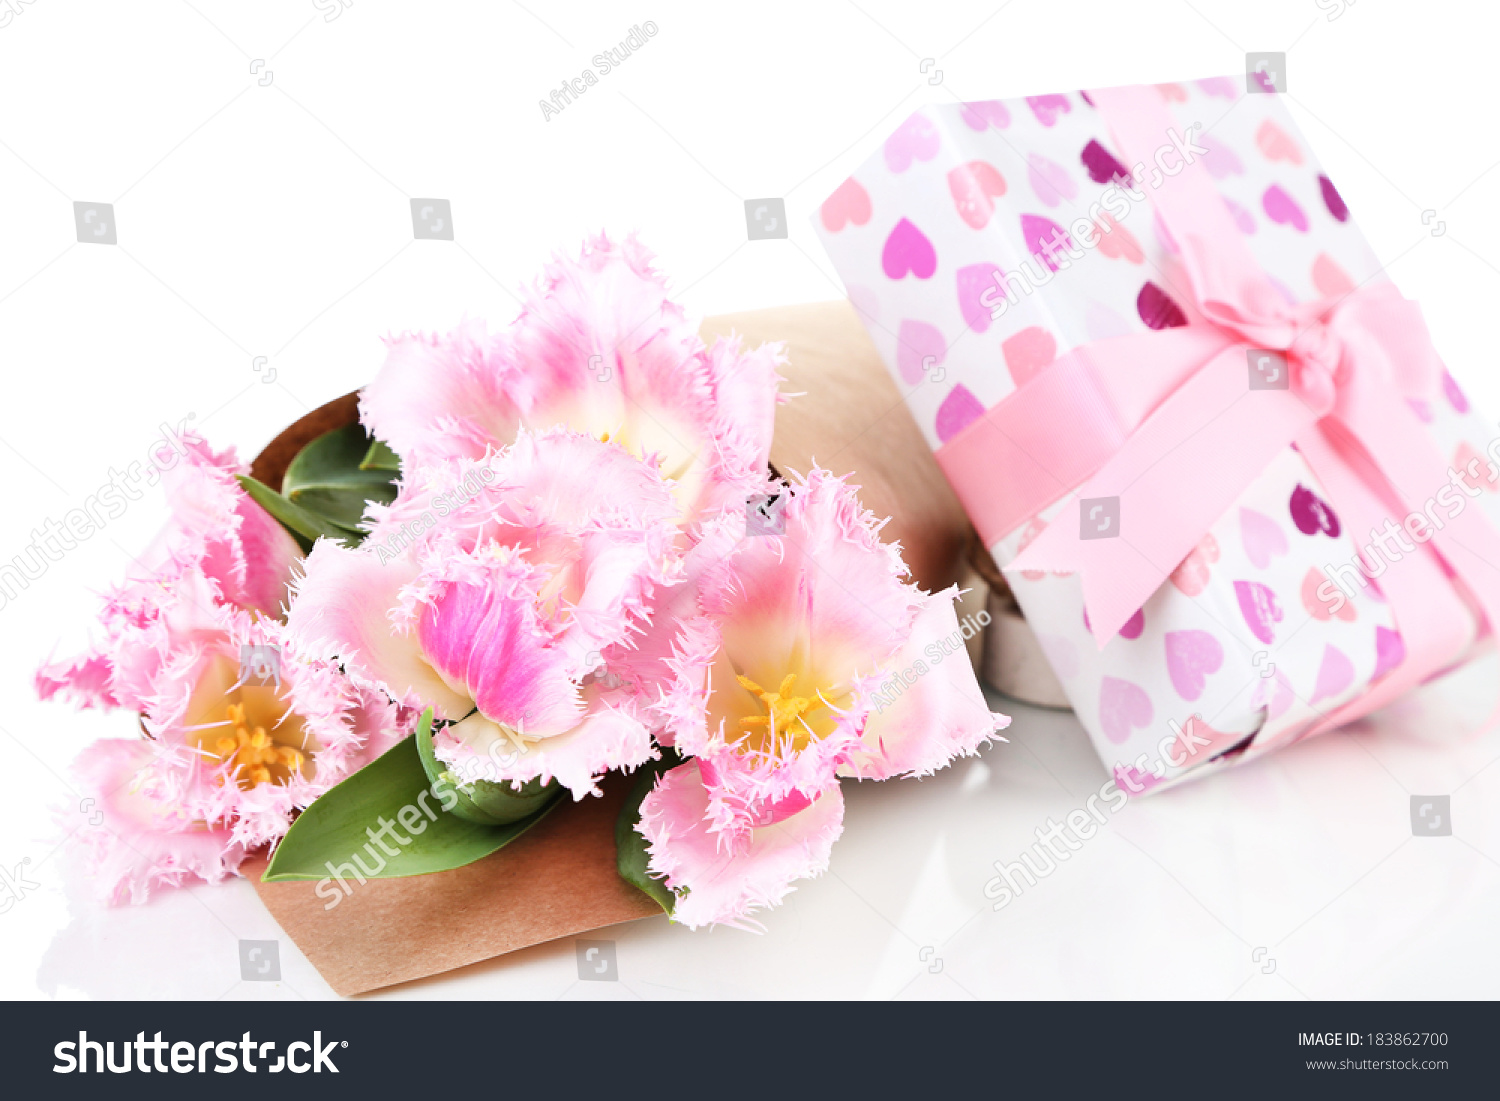 Beautiful tulips and gift box, isolated on white #183862700